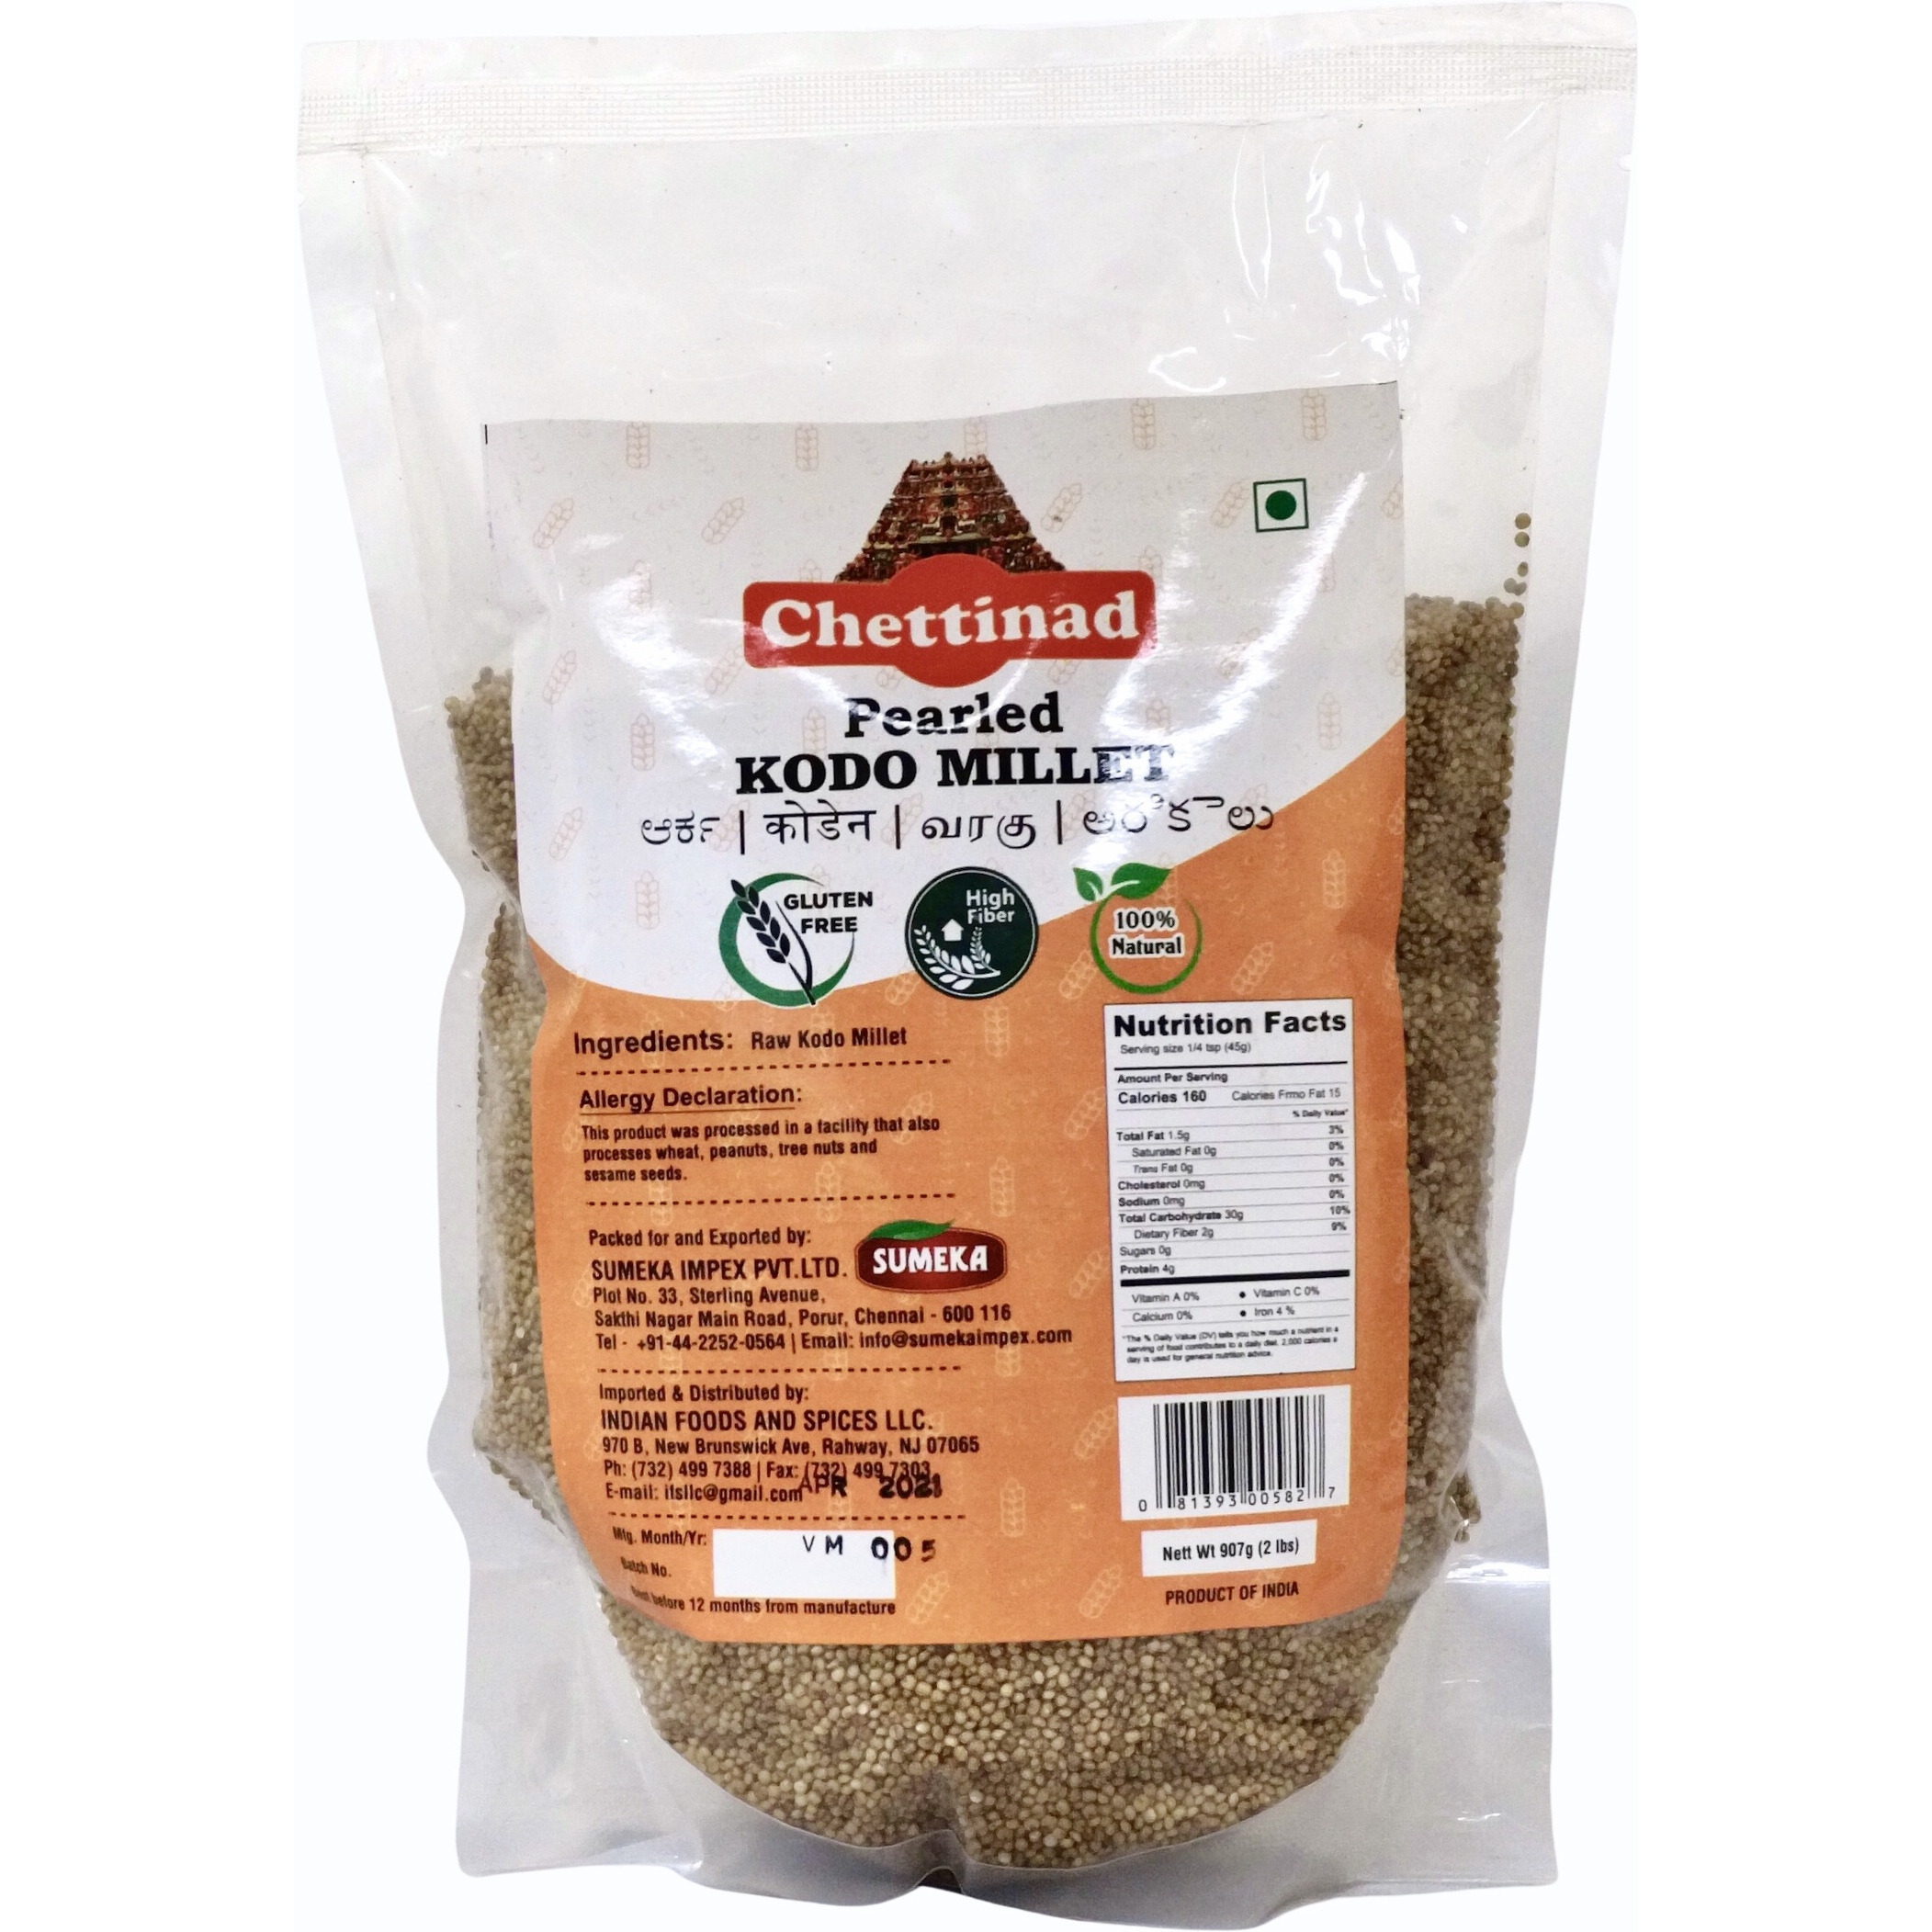 Pack of 2 - Chettinad Pearled Raw Kodo Millet - 2 Lb (907 Gm)